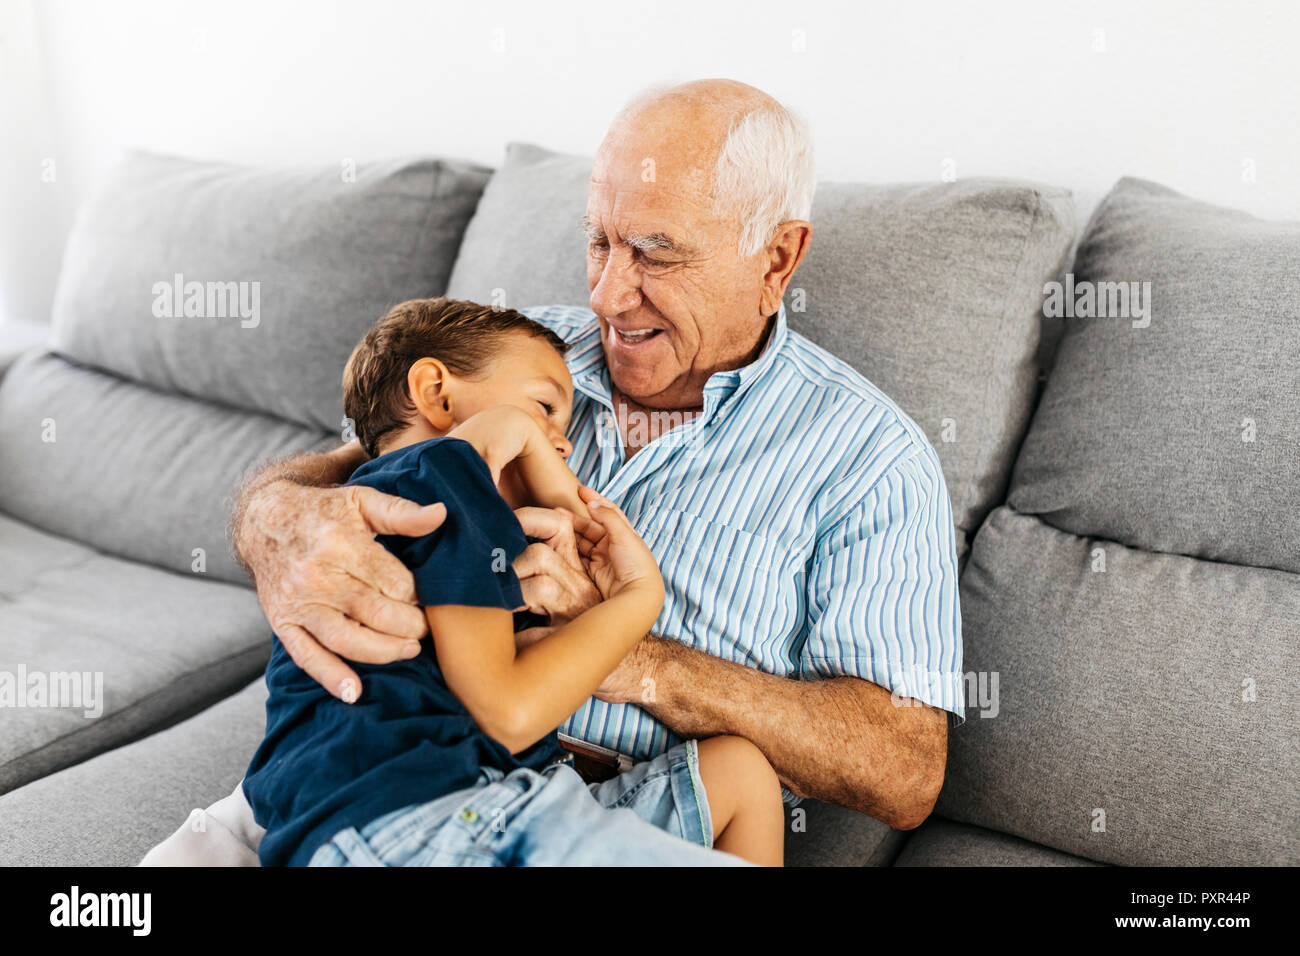 Grandson and grandfather laughing while tickling each other on the couch Stock Photo